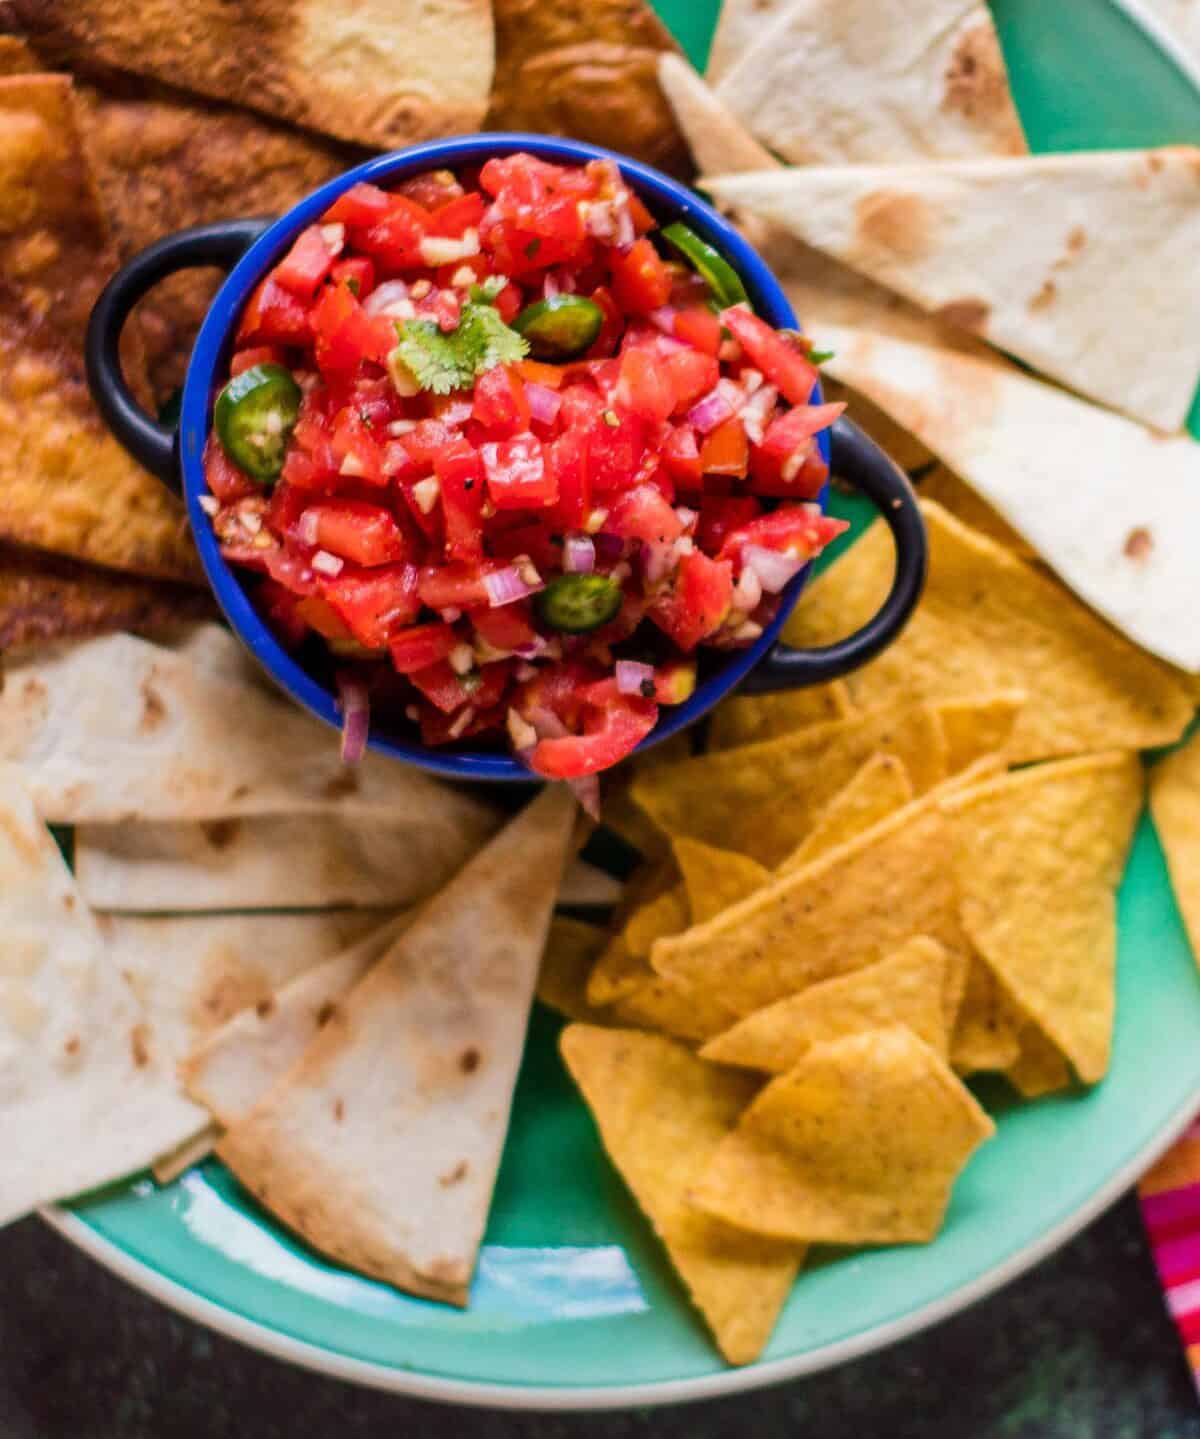 Tasty Homemade Salsa Recipe for a Flavorful Snack